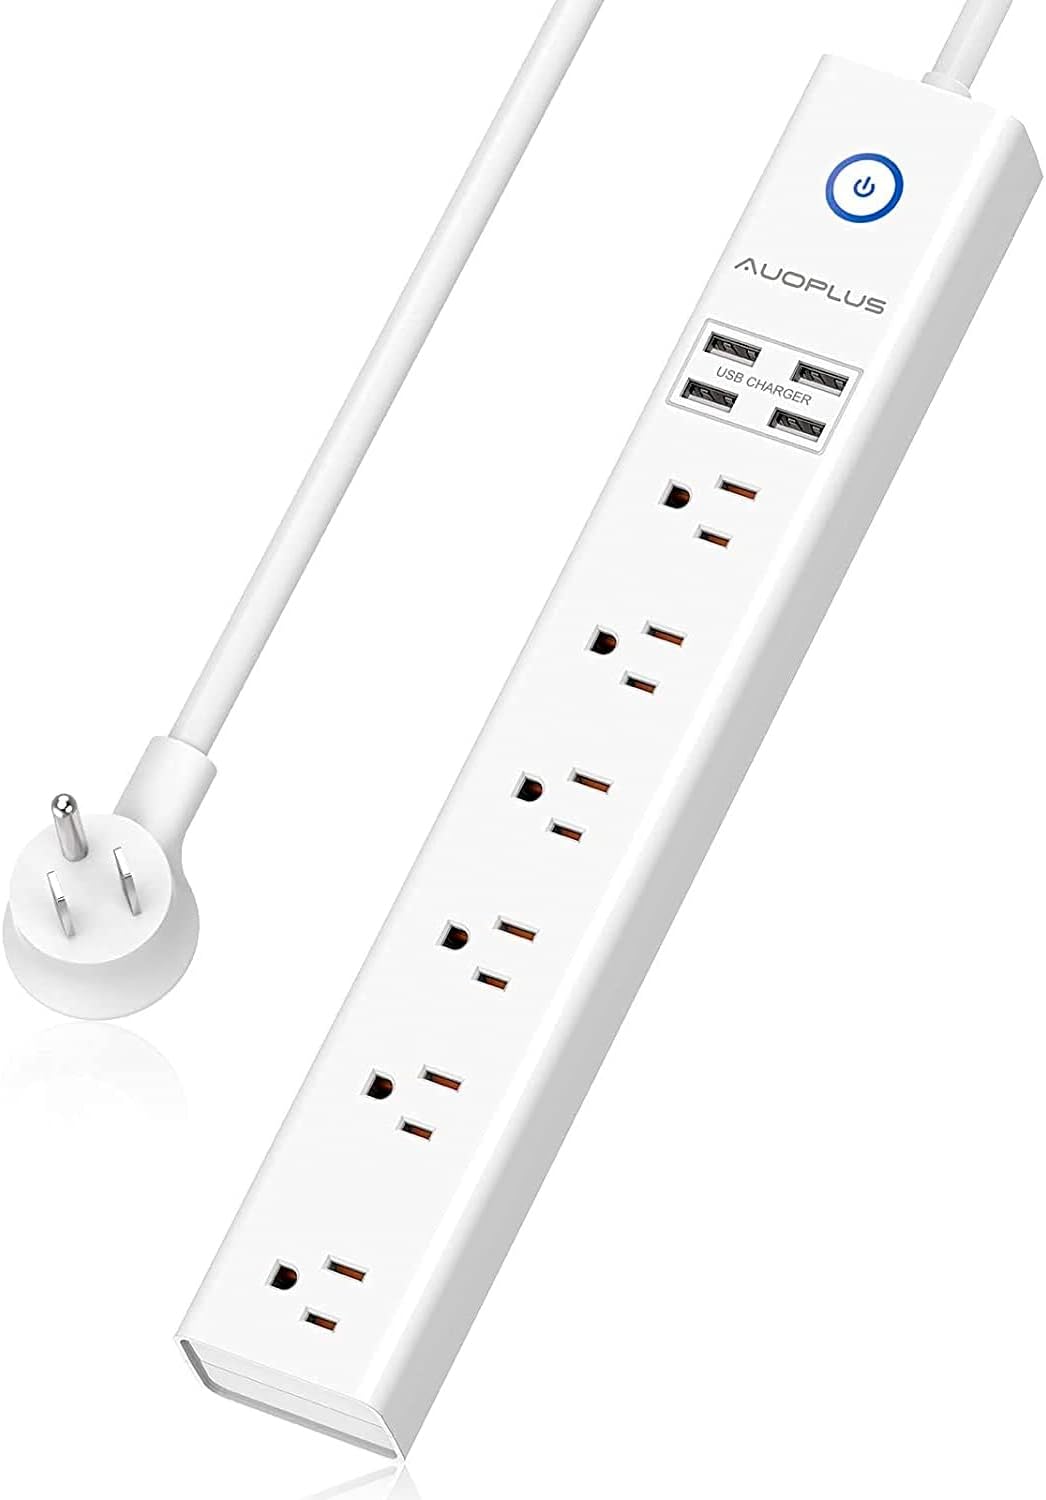 15 Ft Power Strip Surge Protector, 6 Outlets and 4 USB Ports, Flat Plug Power Strips Long Extension Cord with Overload Protection, Wall Mount for Home, Office, Dorm, ETL Listed White